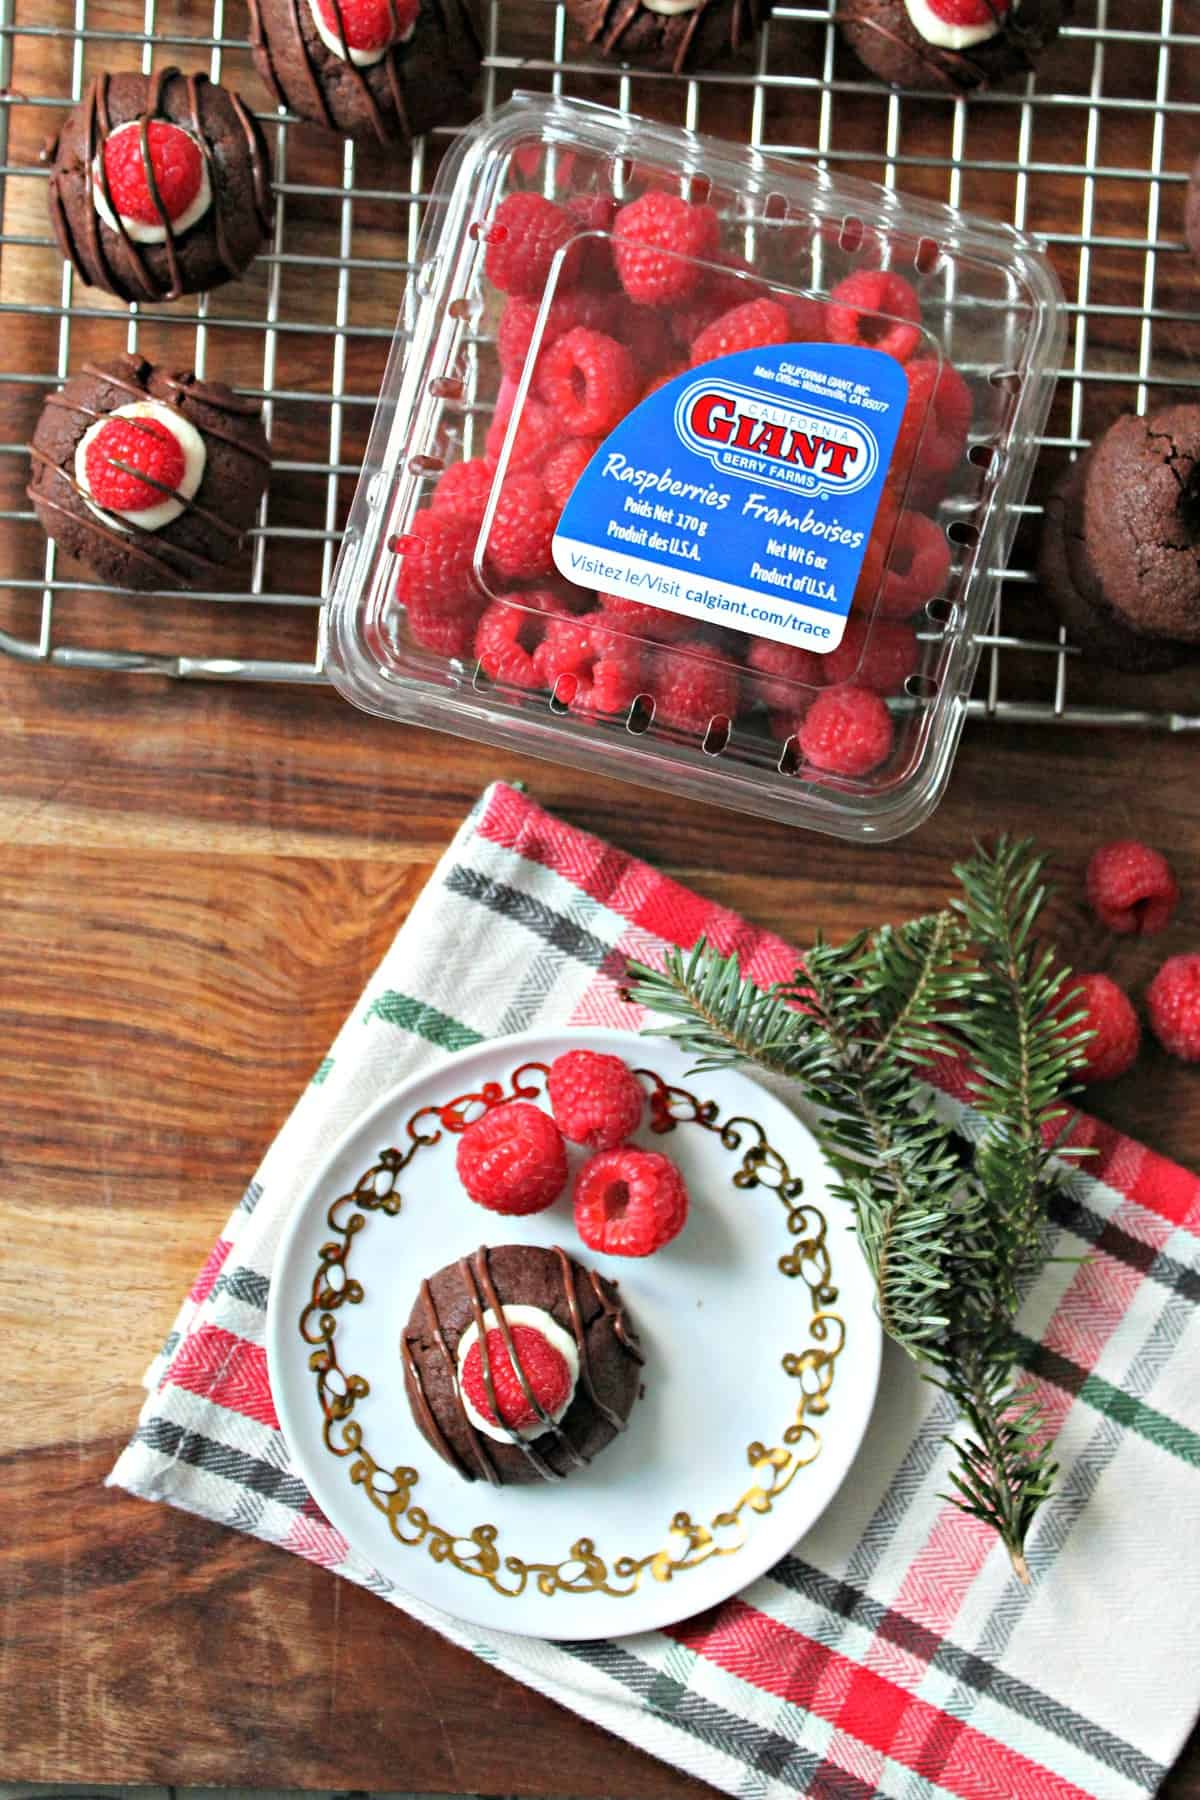 Raspberry Cheesecake Chocolate Thumbprint Cookies! This thumbprint cookie recipe will become a family favorite: Tender chocolate cookies filled with creamy "cheesecake" filling, fresh raspberries and topped with a chocolate drizzle! A beauty to share for holiday cookie exchange parties and beyond.